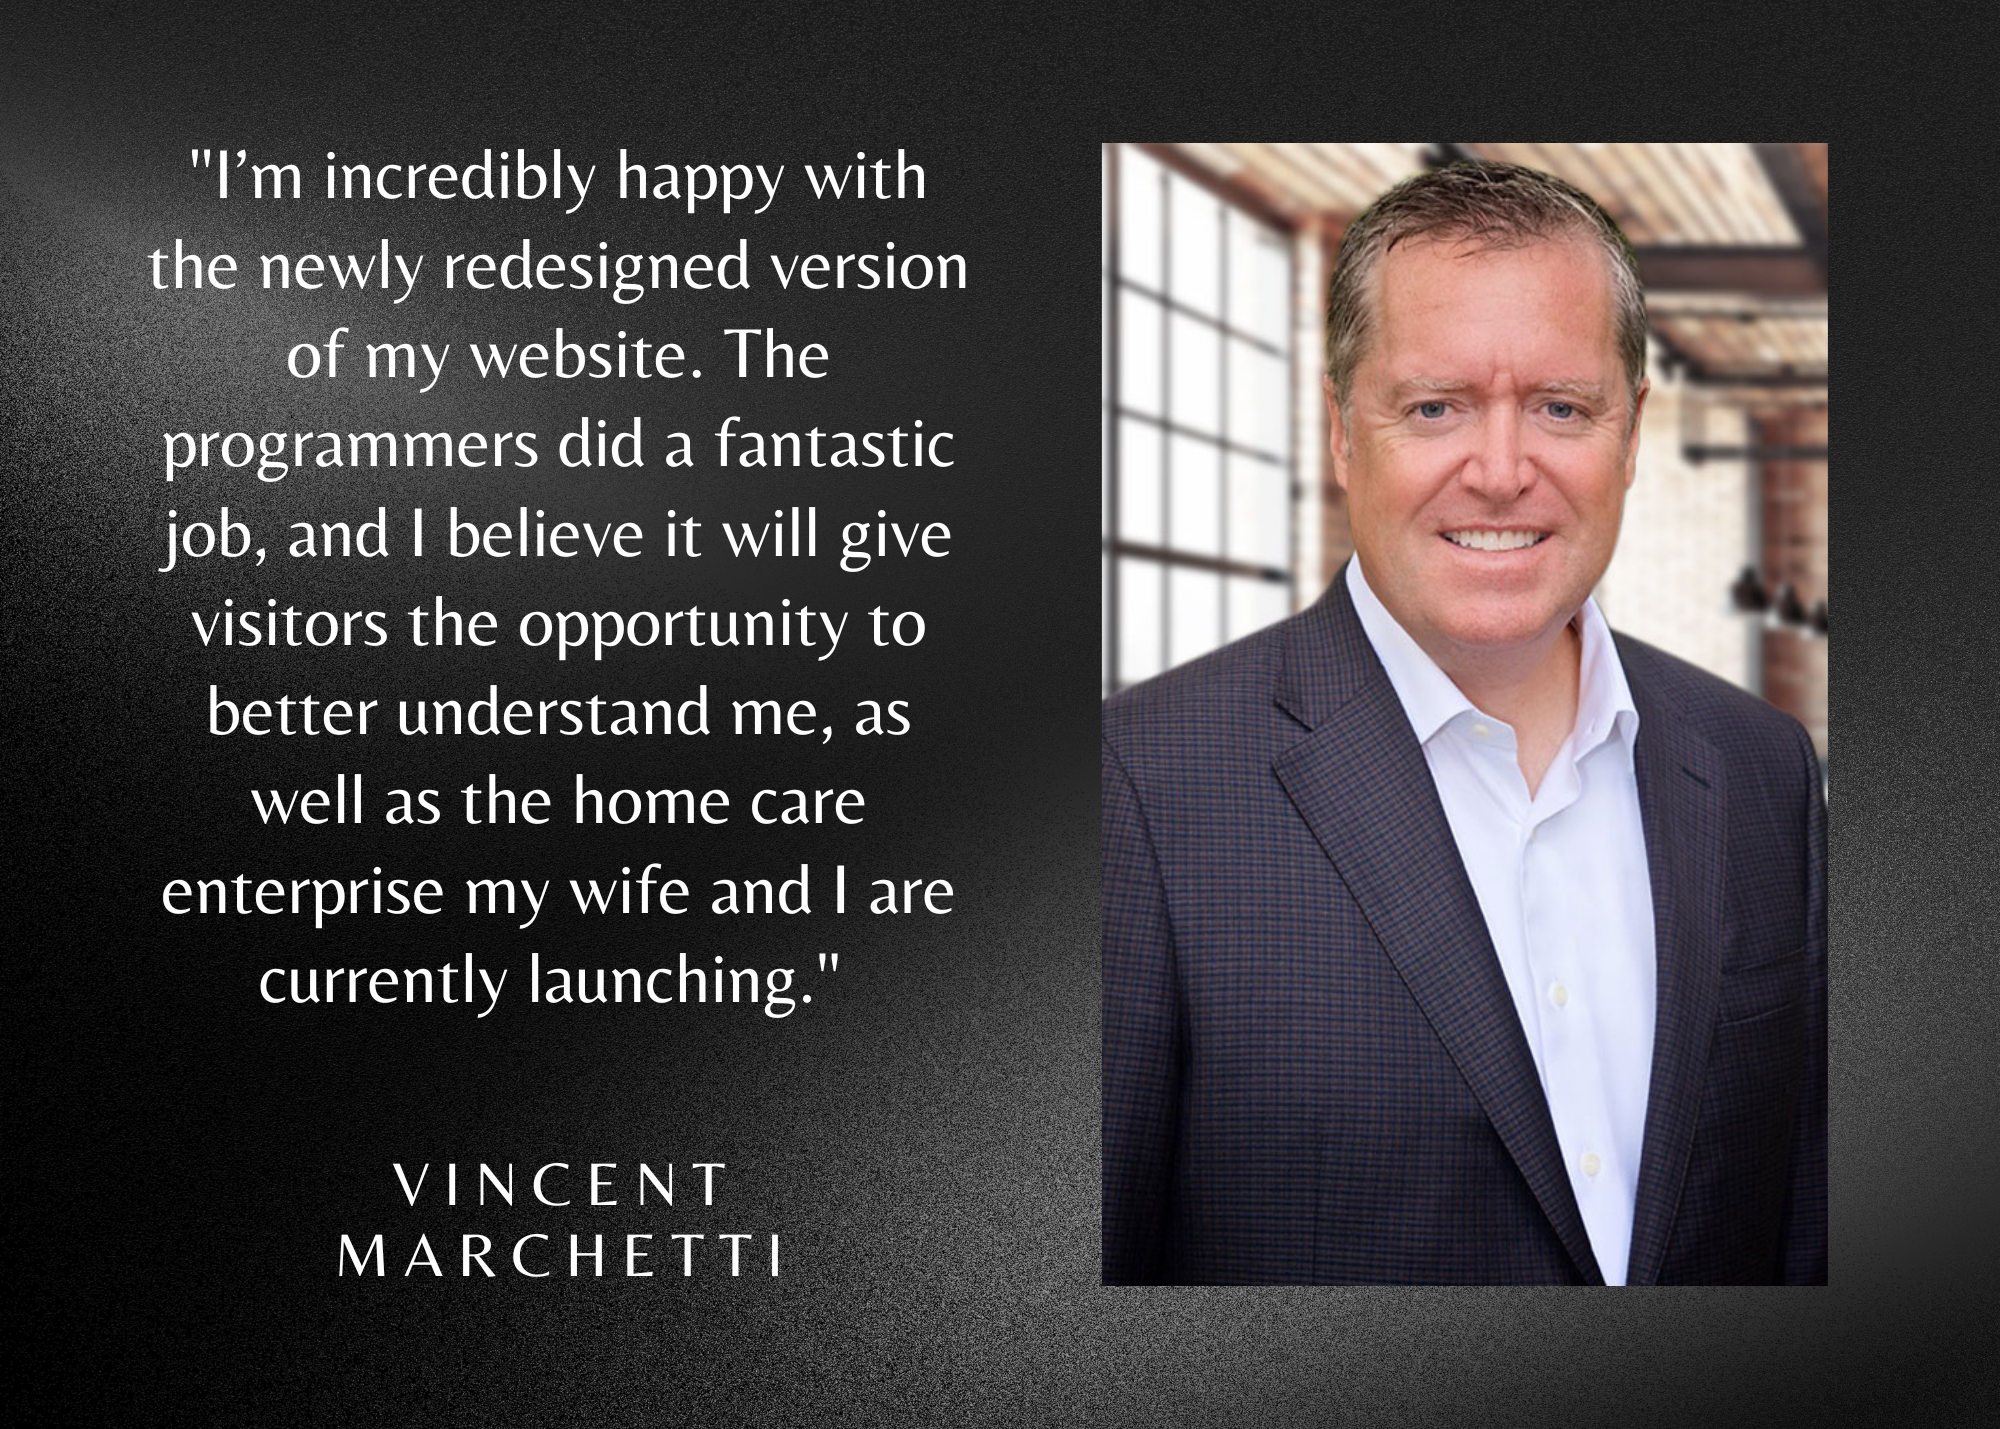 Vincent Marchetti Updates and Re-Launches His Official Website